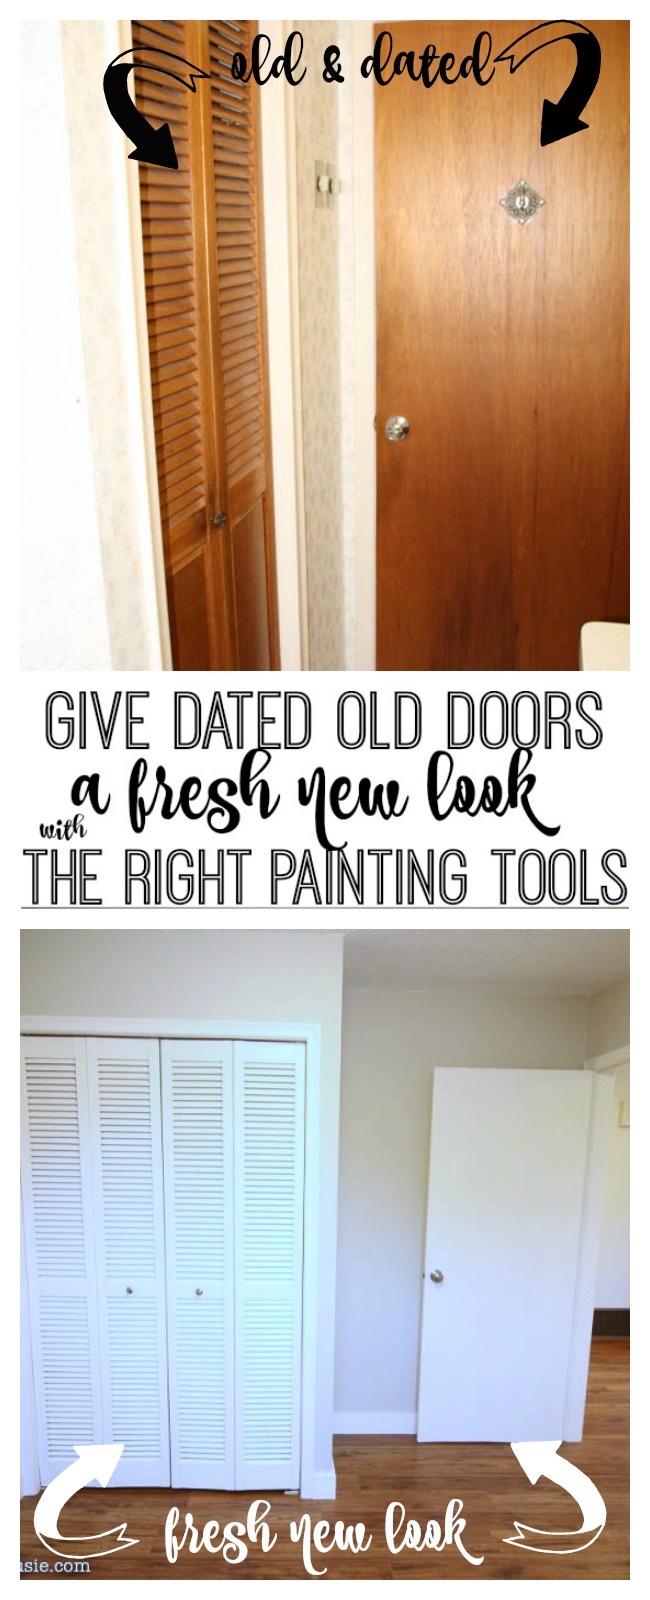 Give Dated Old Doors The Right Painting Tools graphic.